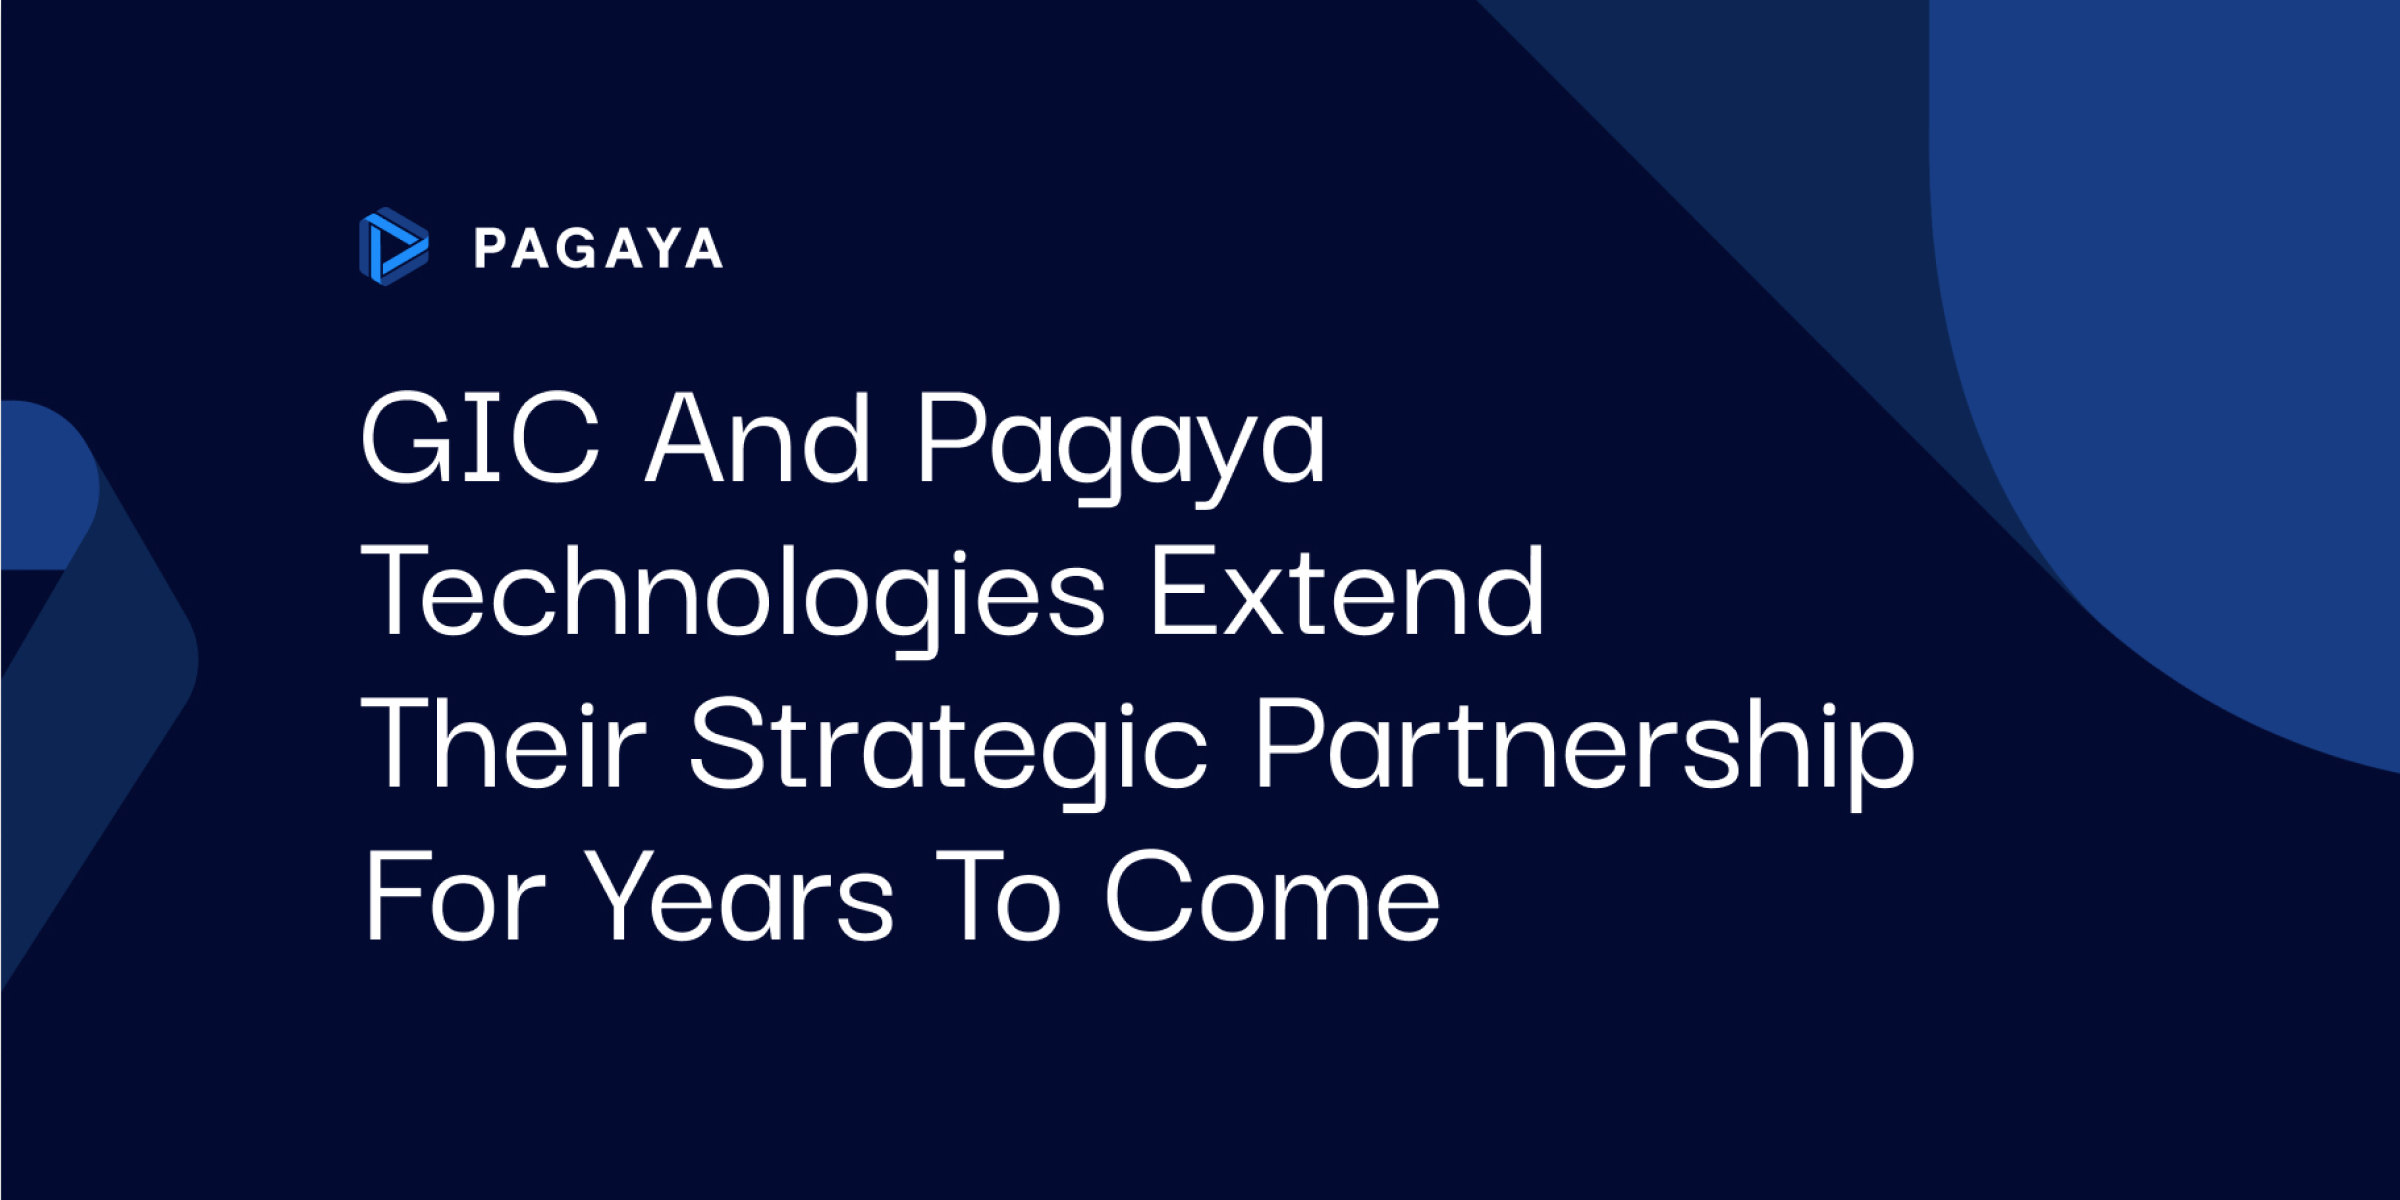 GIC and Pagaya Technologies Extend Their Strategic Partnership for Years to Come white text on a blue background with blue ribbon graphics